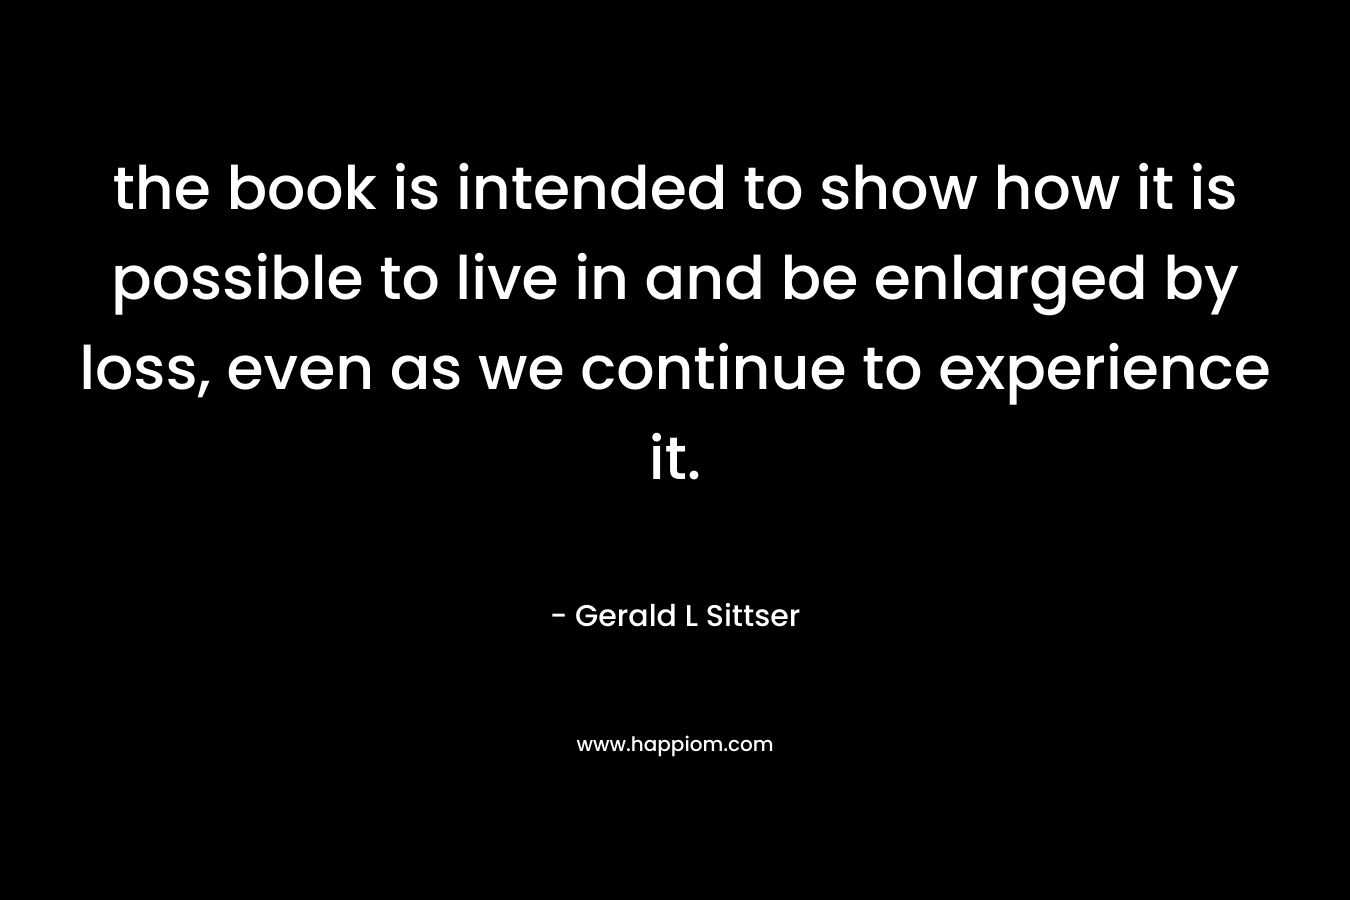 the book is intended to show how it is possible to live in and be enlarged by loss, even as we continue to experience it. – Gerald L Sittser